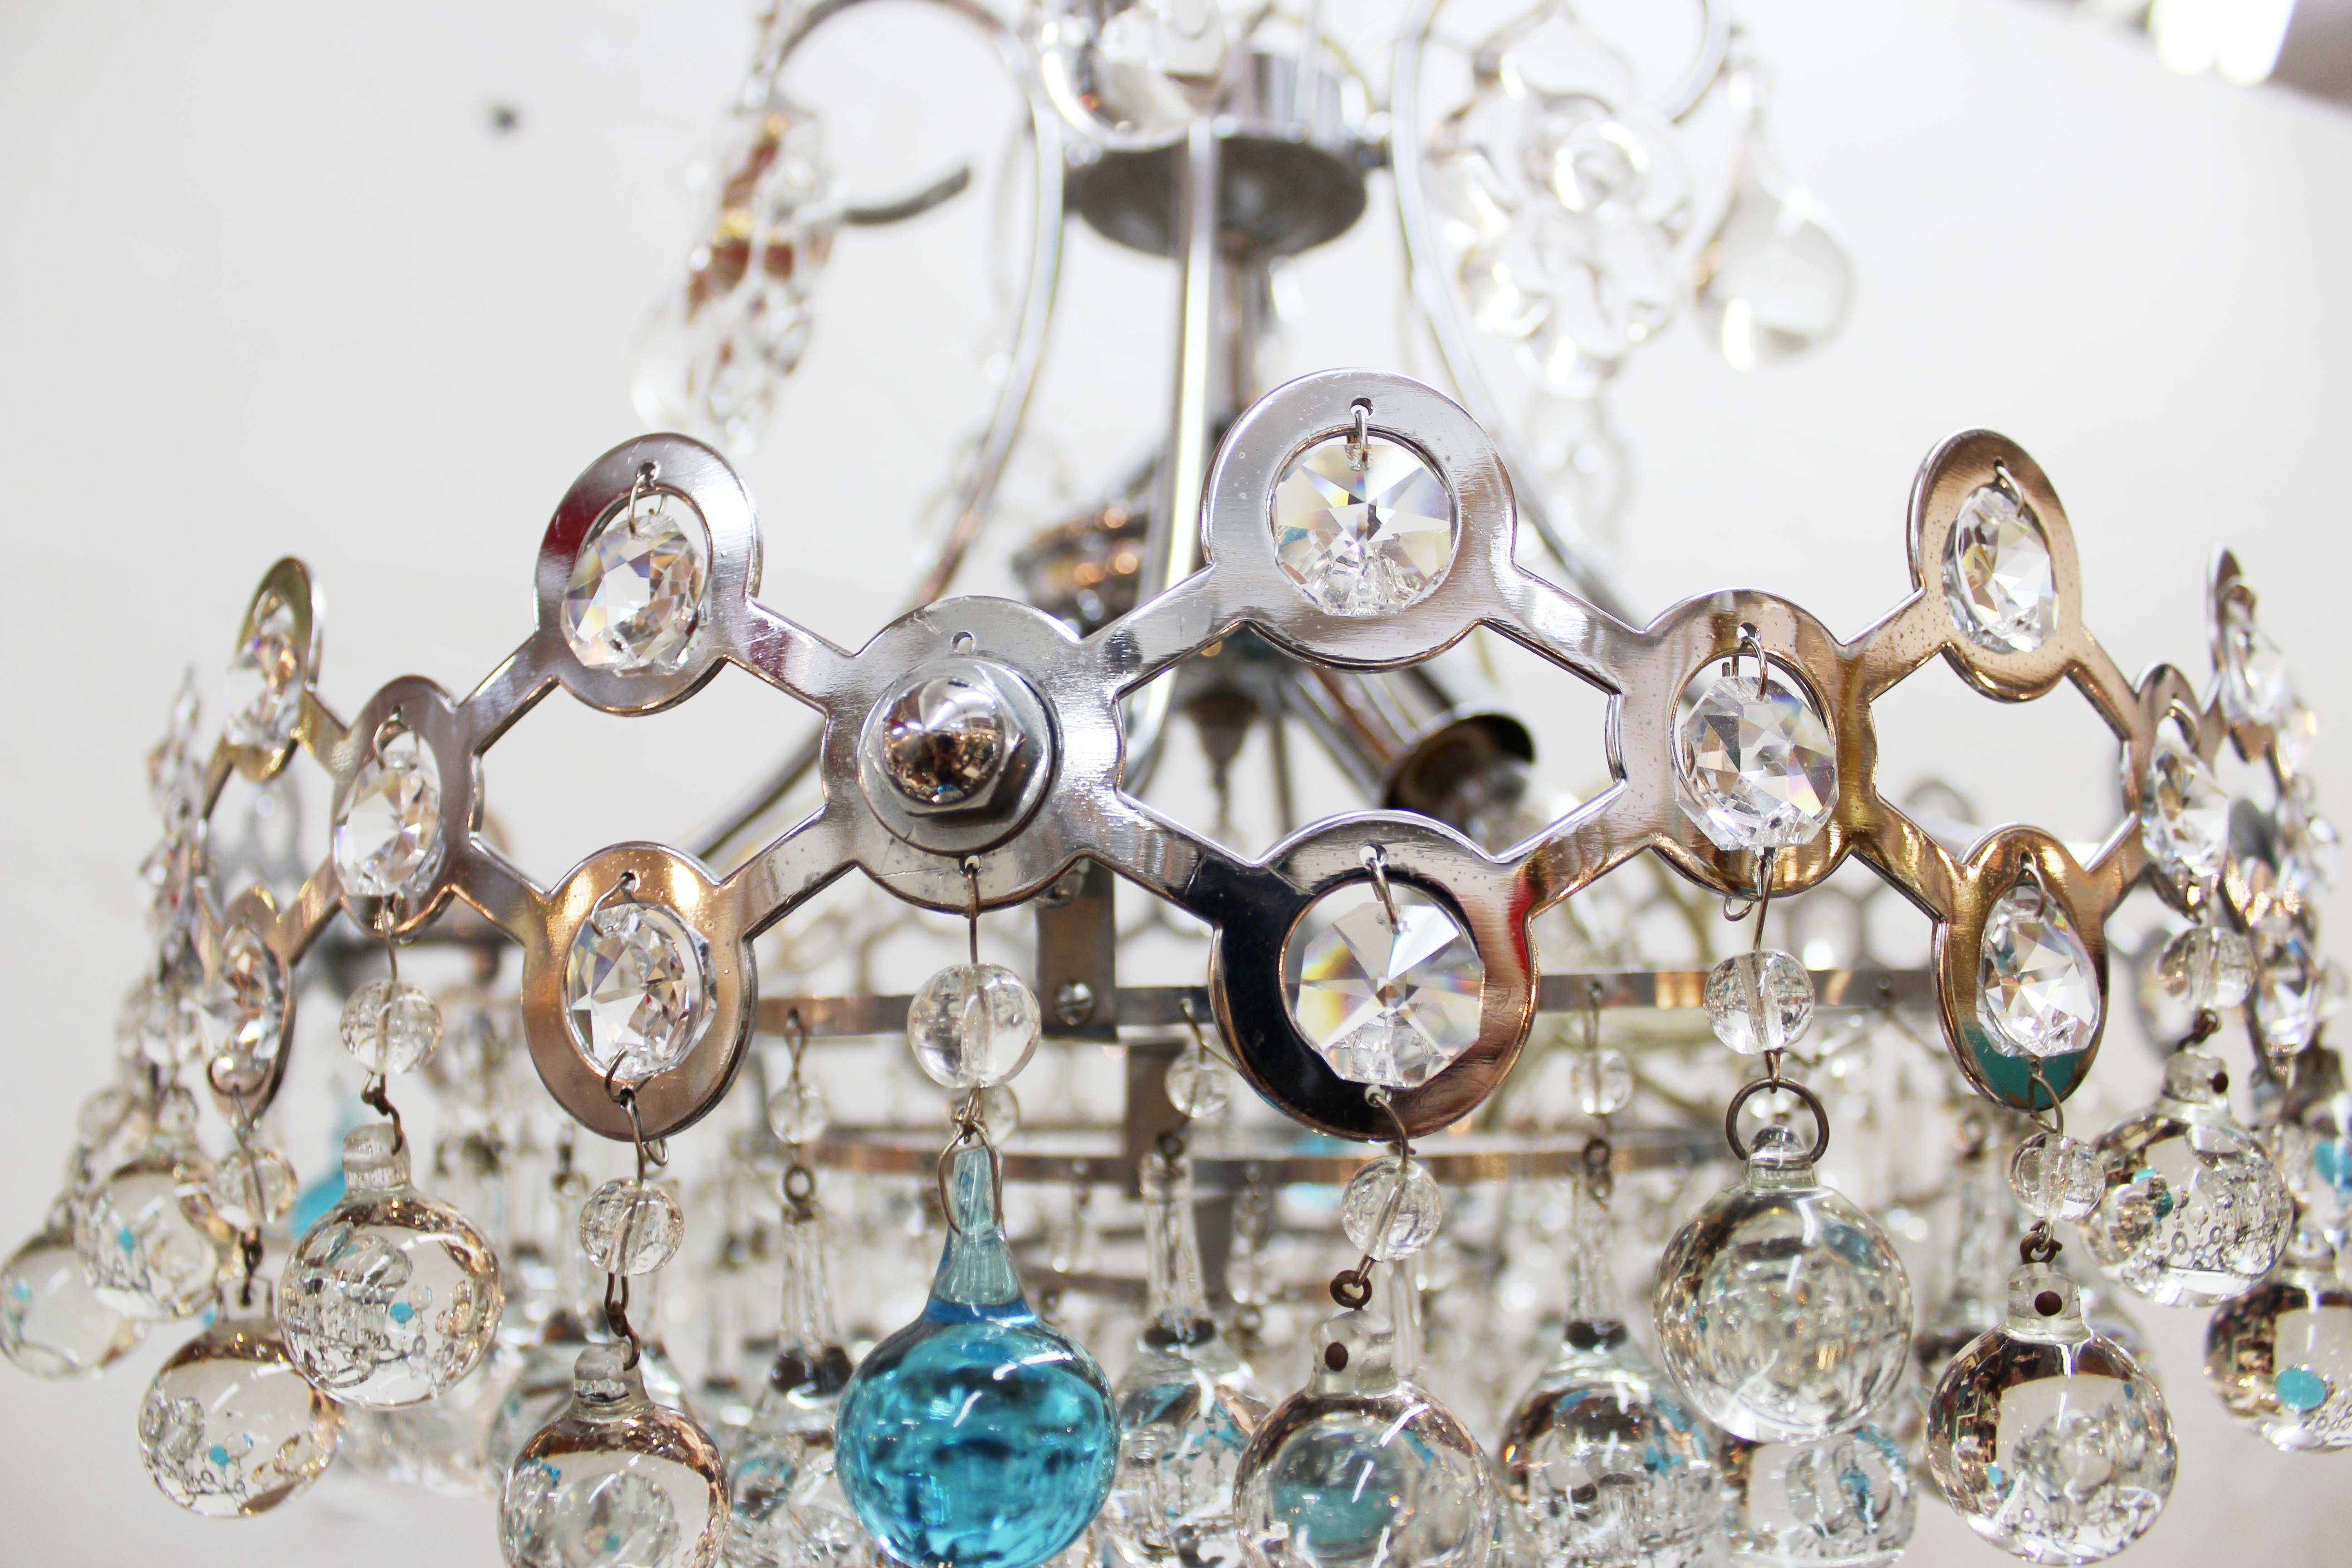 Italian Mid-Century Modern Chrome Chandelier with Clear & Turquoise Glass Balls 4